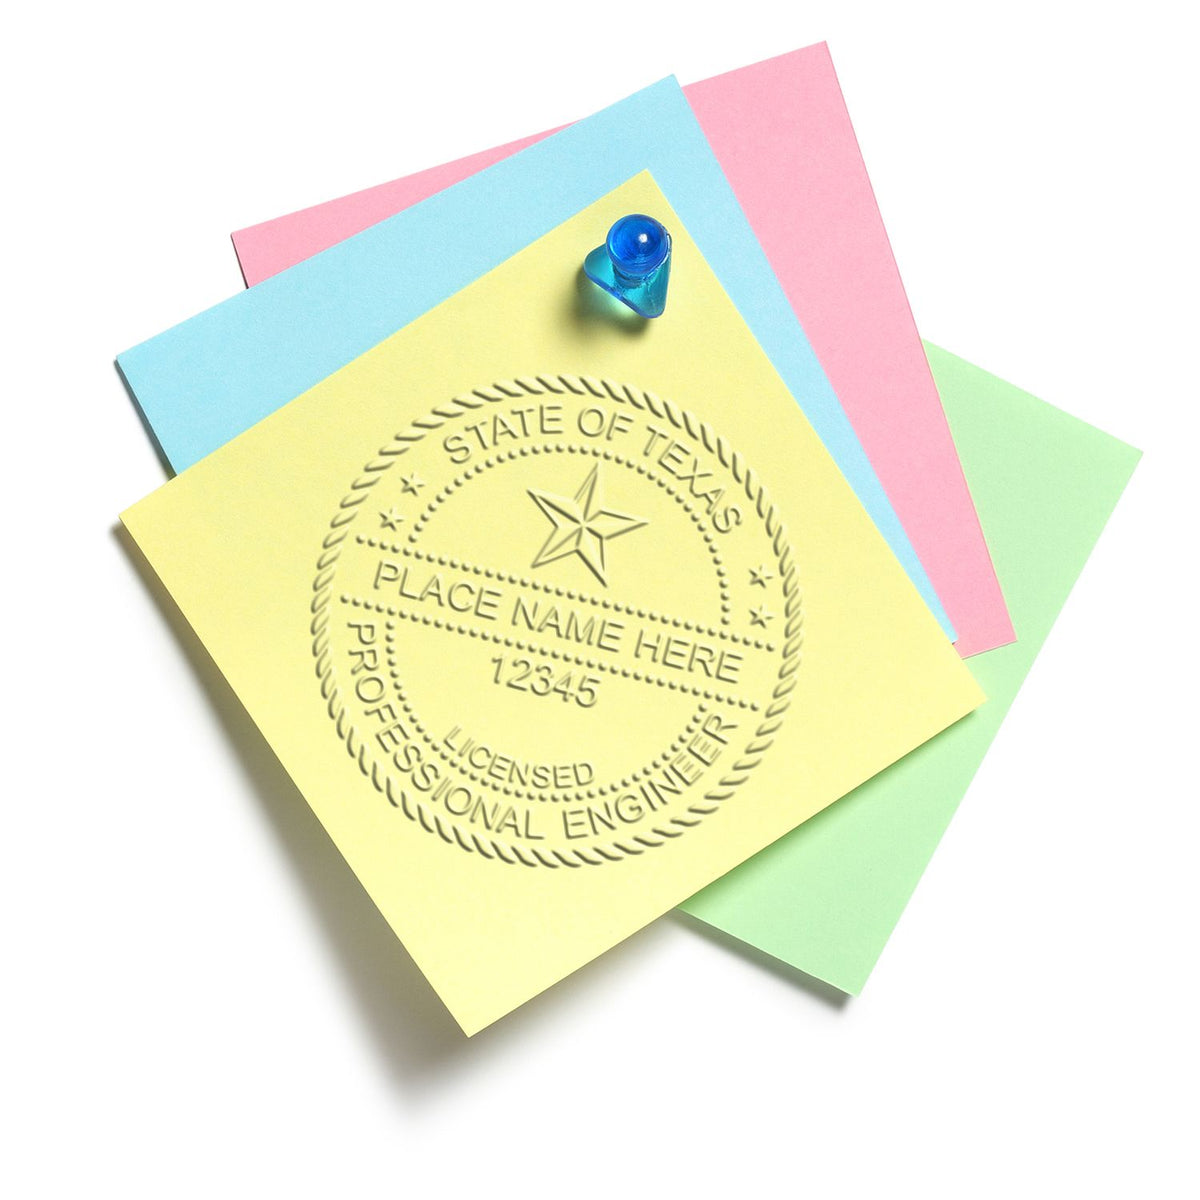 This paper is stamped with a sample imprint of the Soft Texas Professional Engineer Seal, signifying its quality and reliability.